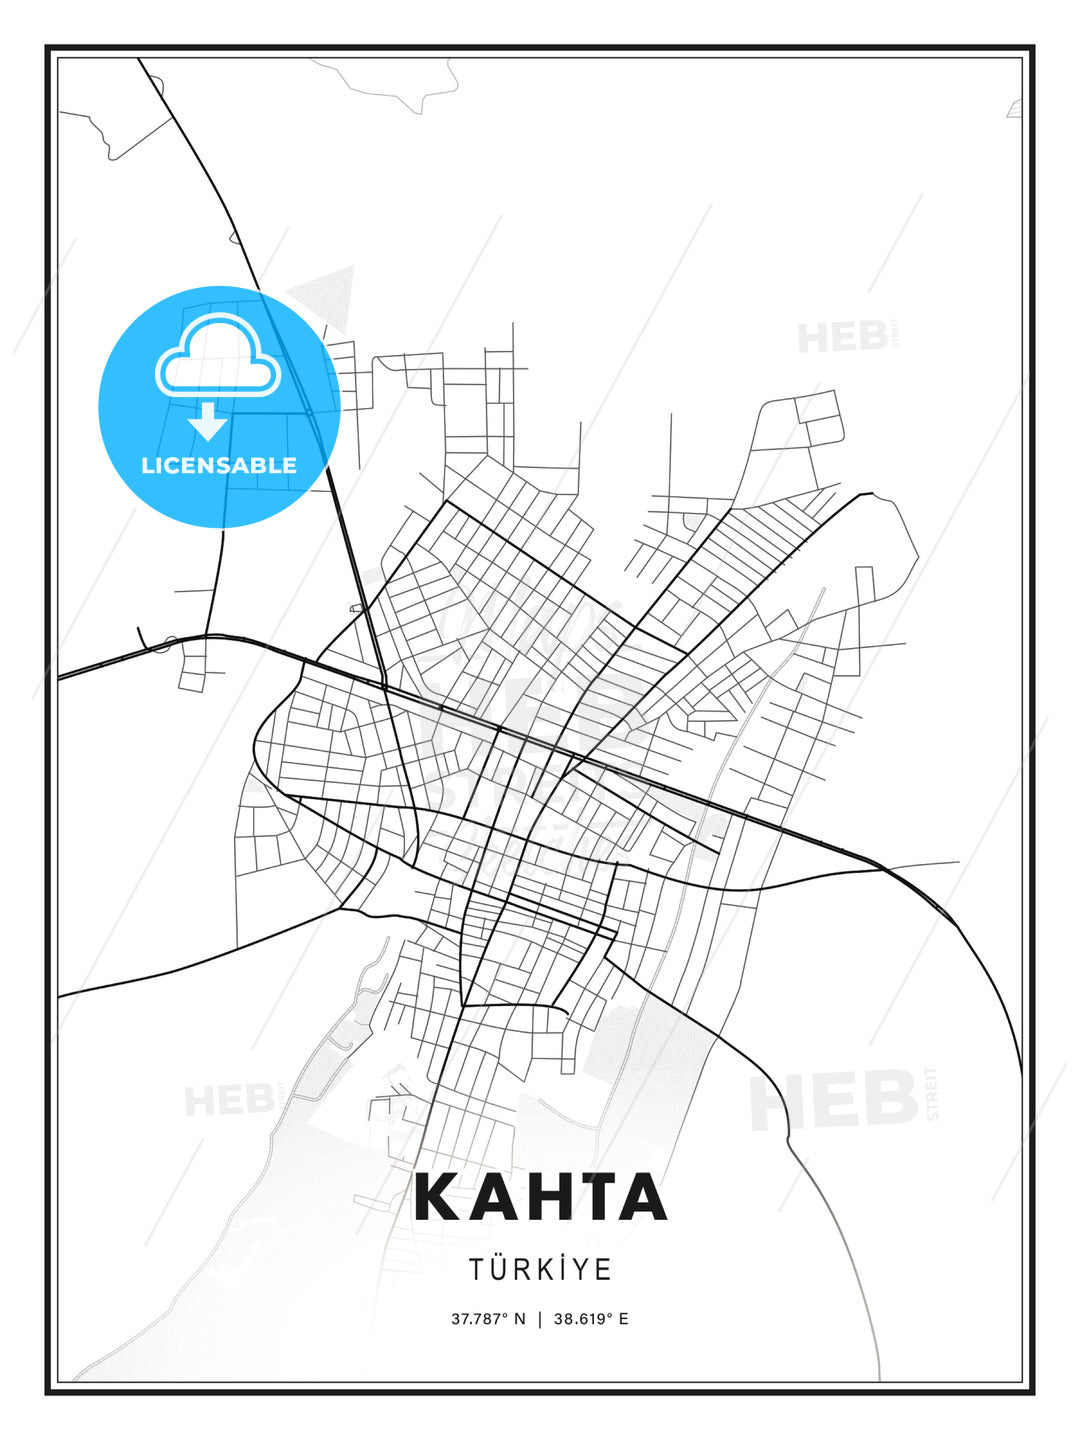 Kahta, Turkey, Modern Print Template in Various Formats - HEBSTREITS Sketches